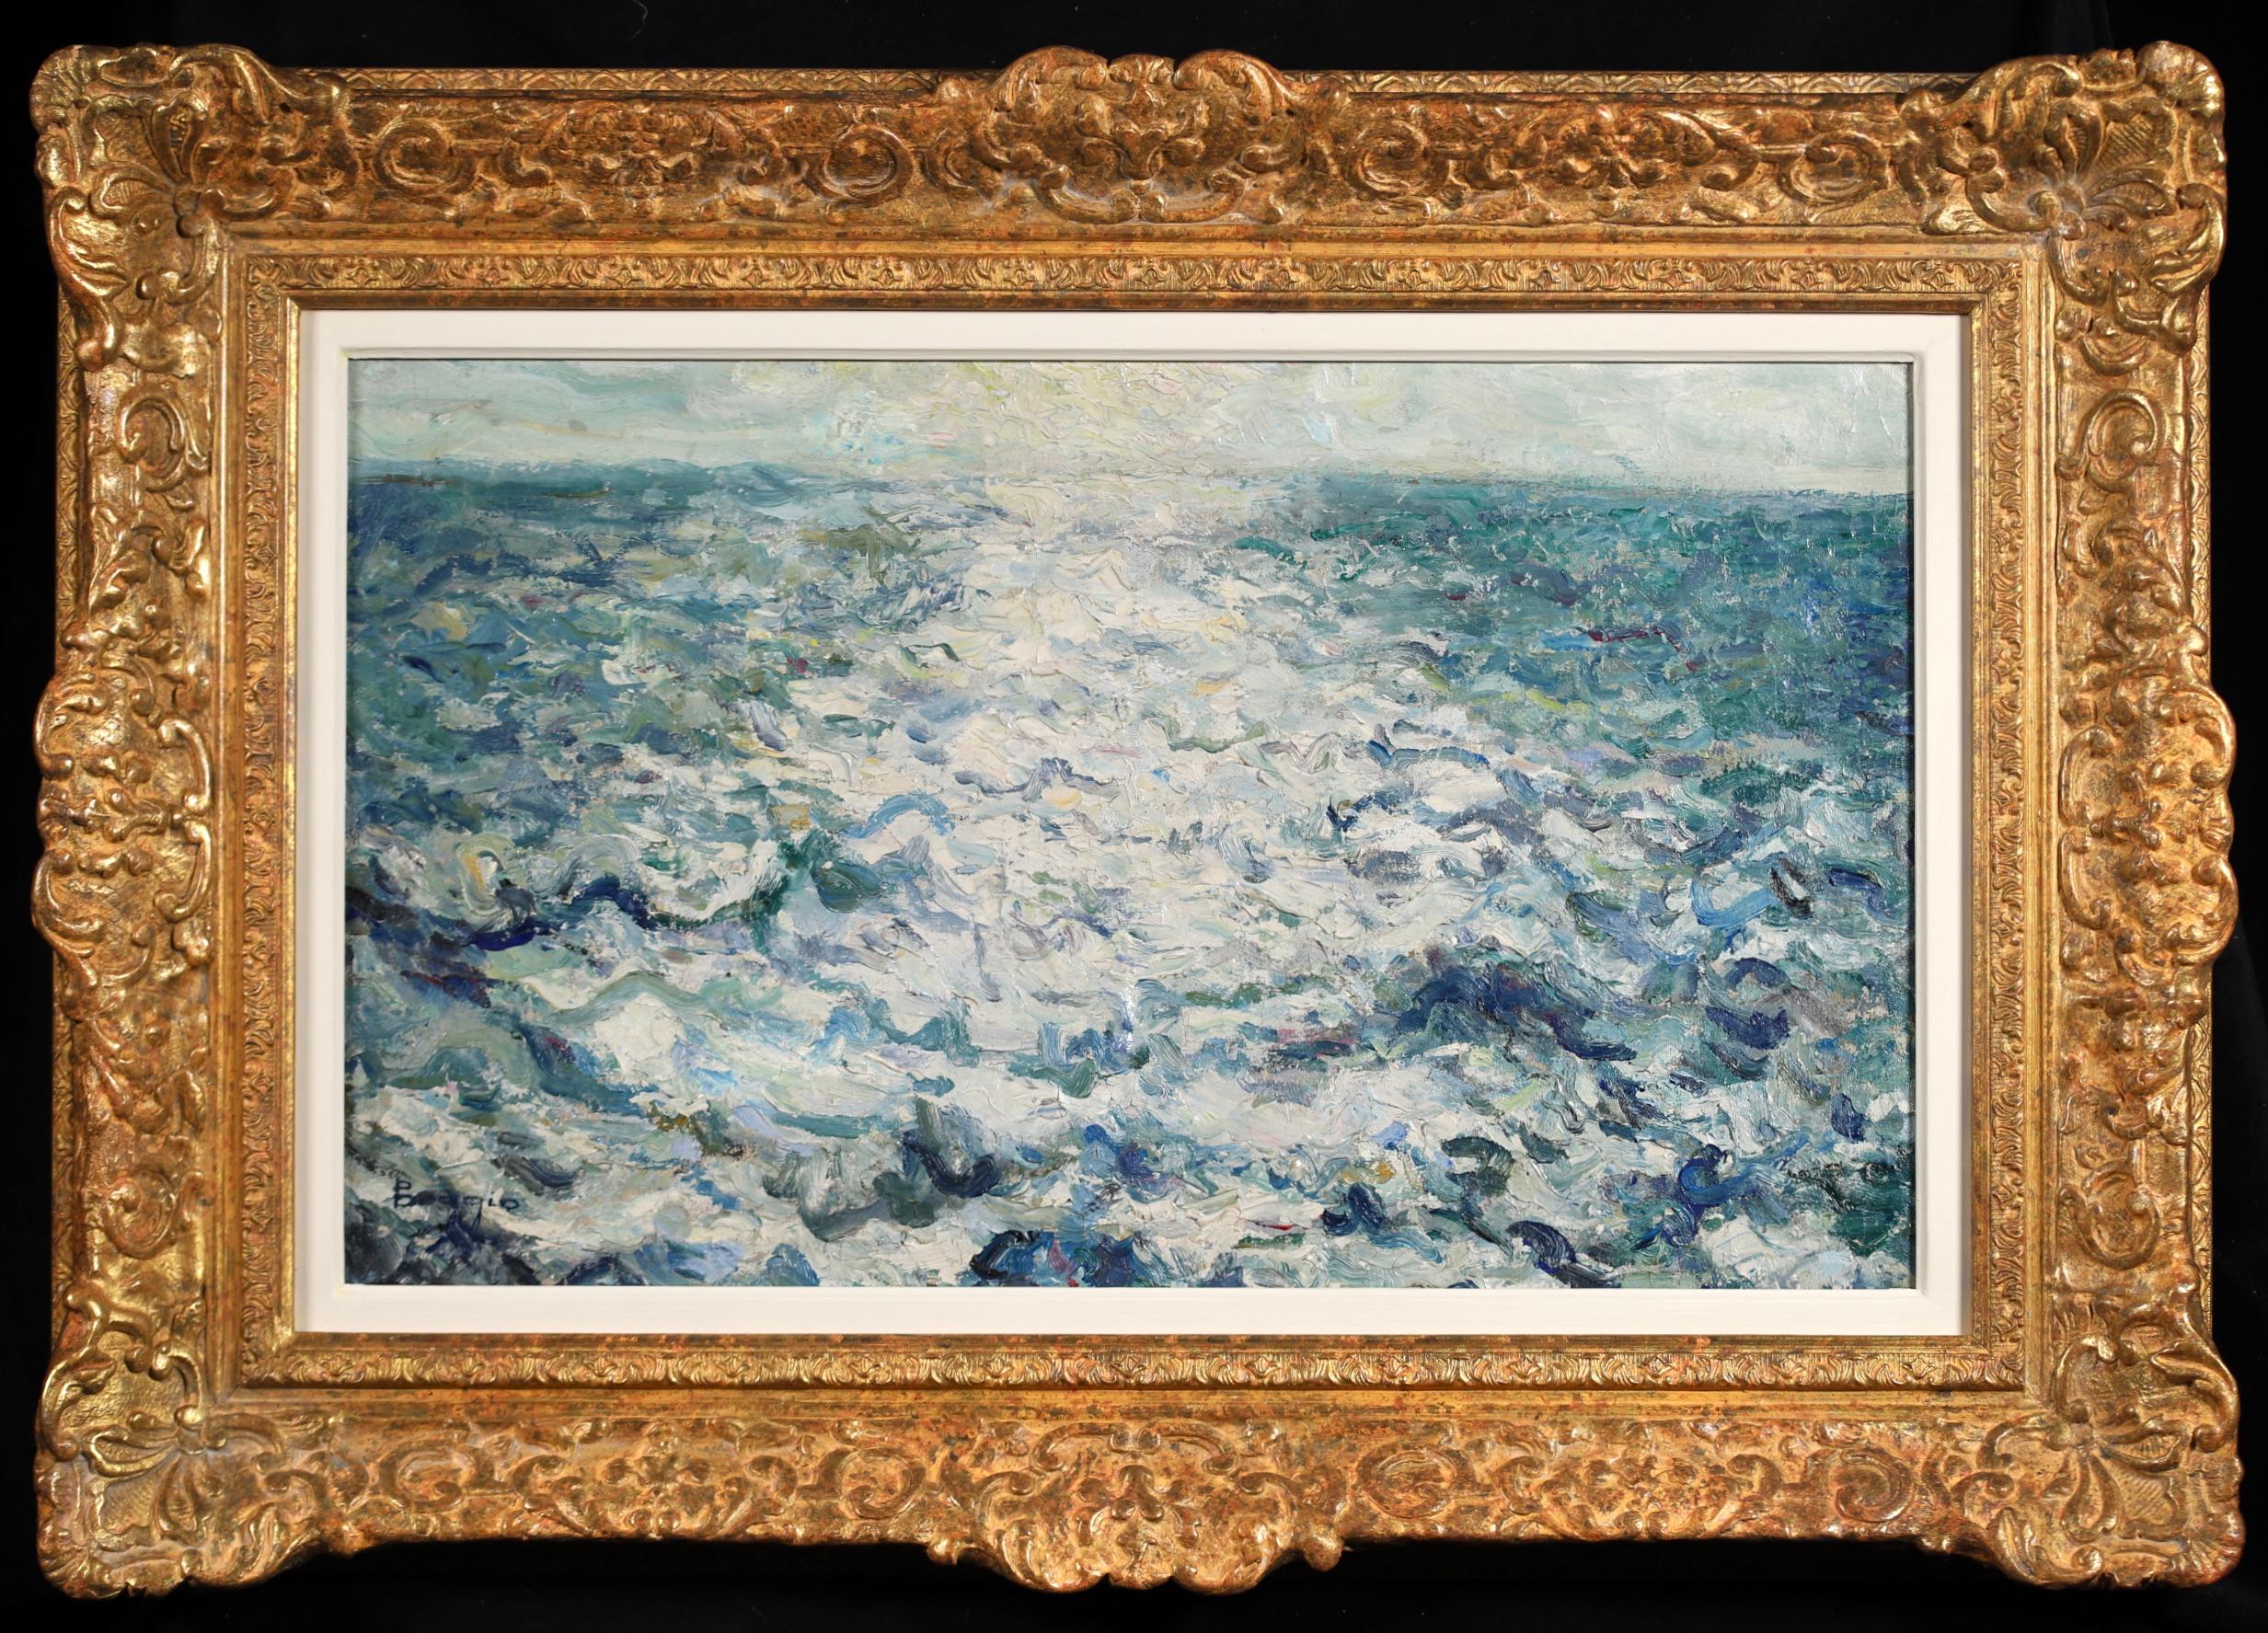 Signed and dated oil on canvas seascape by French impressionist painter Emilio Boggio. The piece in a view of the vast, open ocean - a rich blue sea with white ocean foam leading to the horizon. This work was likely one of the final canvases painted